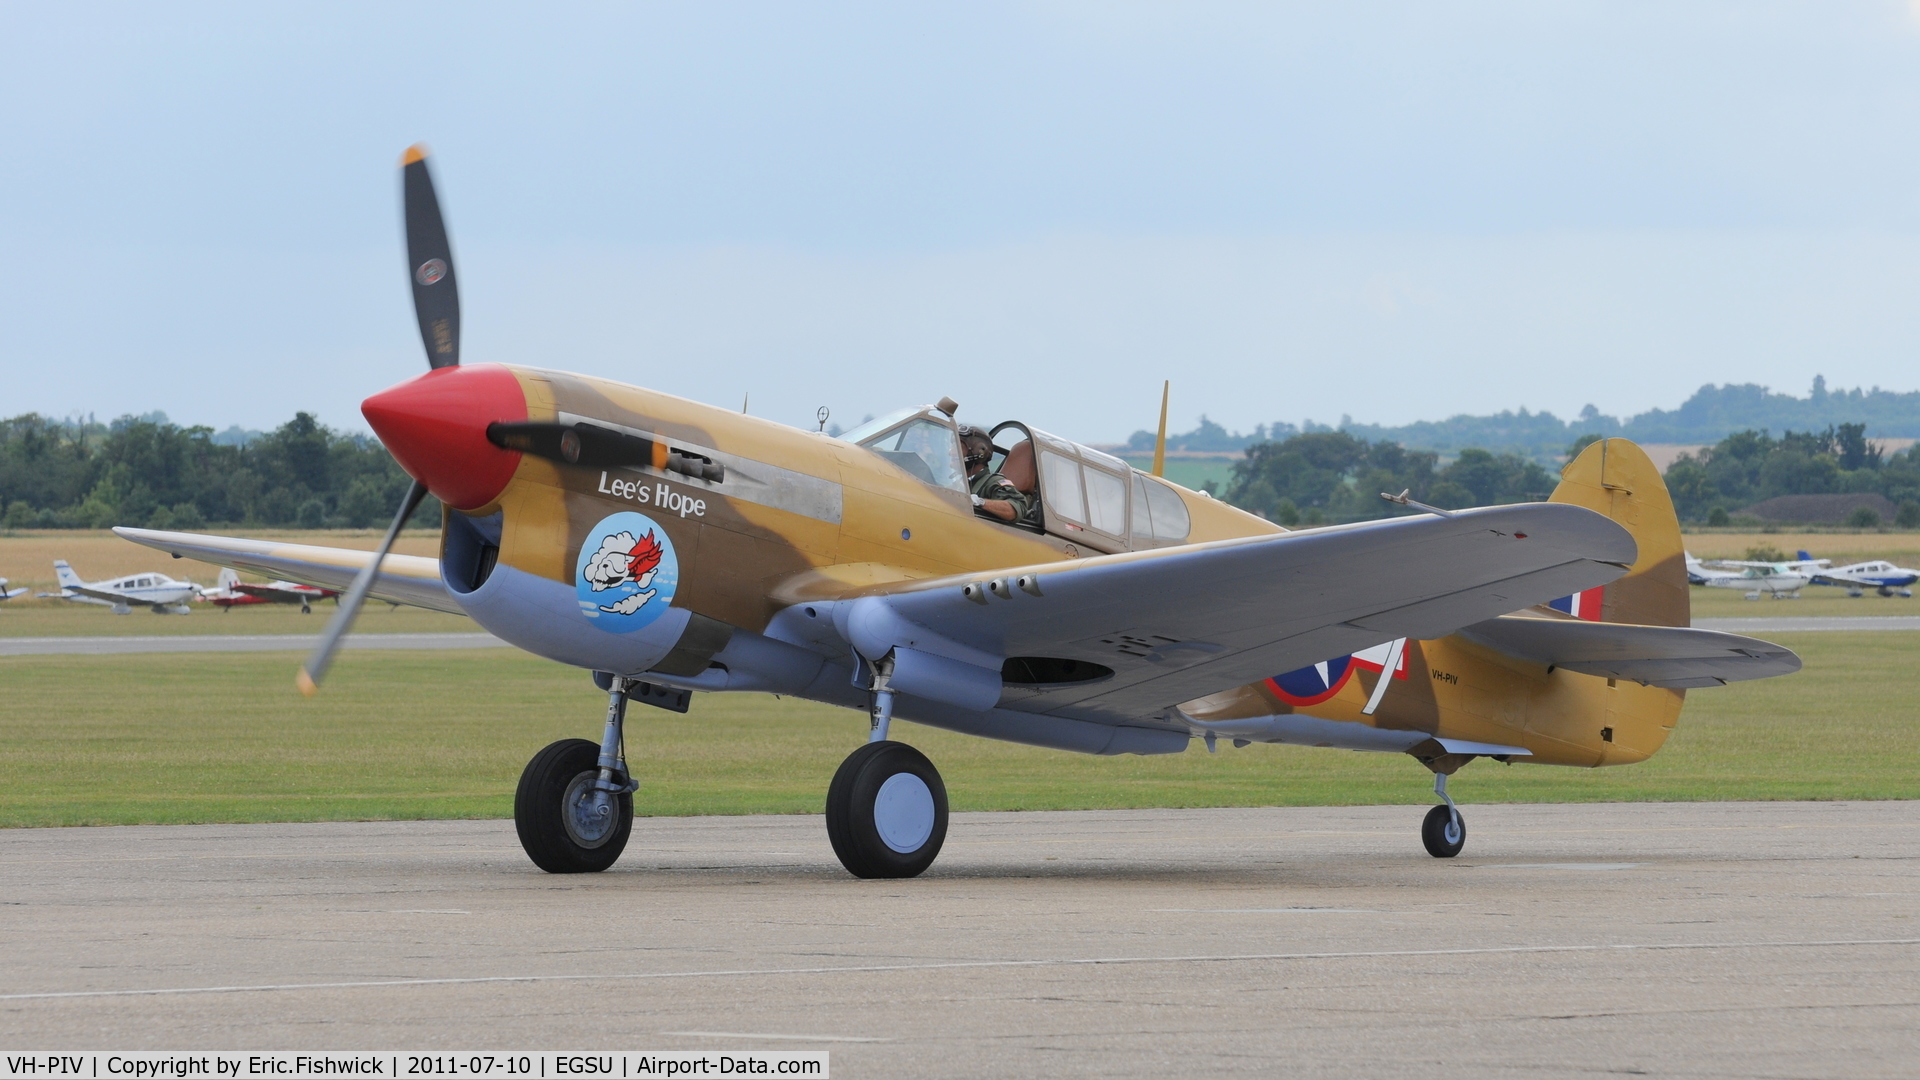 VH-PIV, 1942 Curtiss P-40F Warhawk C/N 19503, 3. VH-PIV at another excellent Flying Legends Air Show (July 2011)